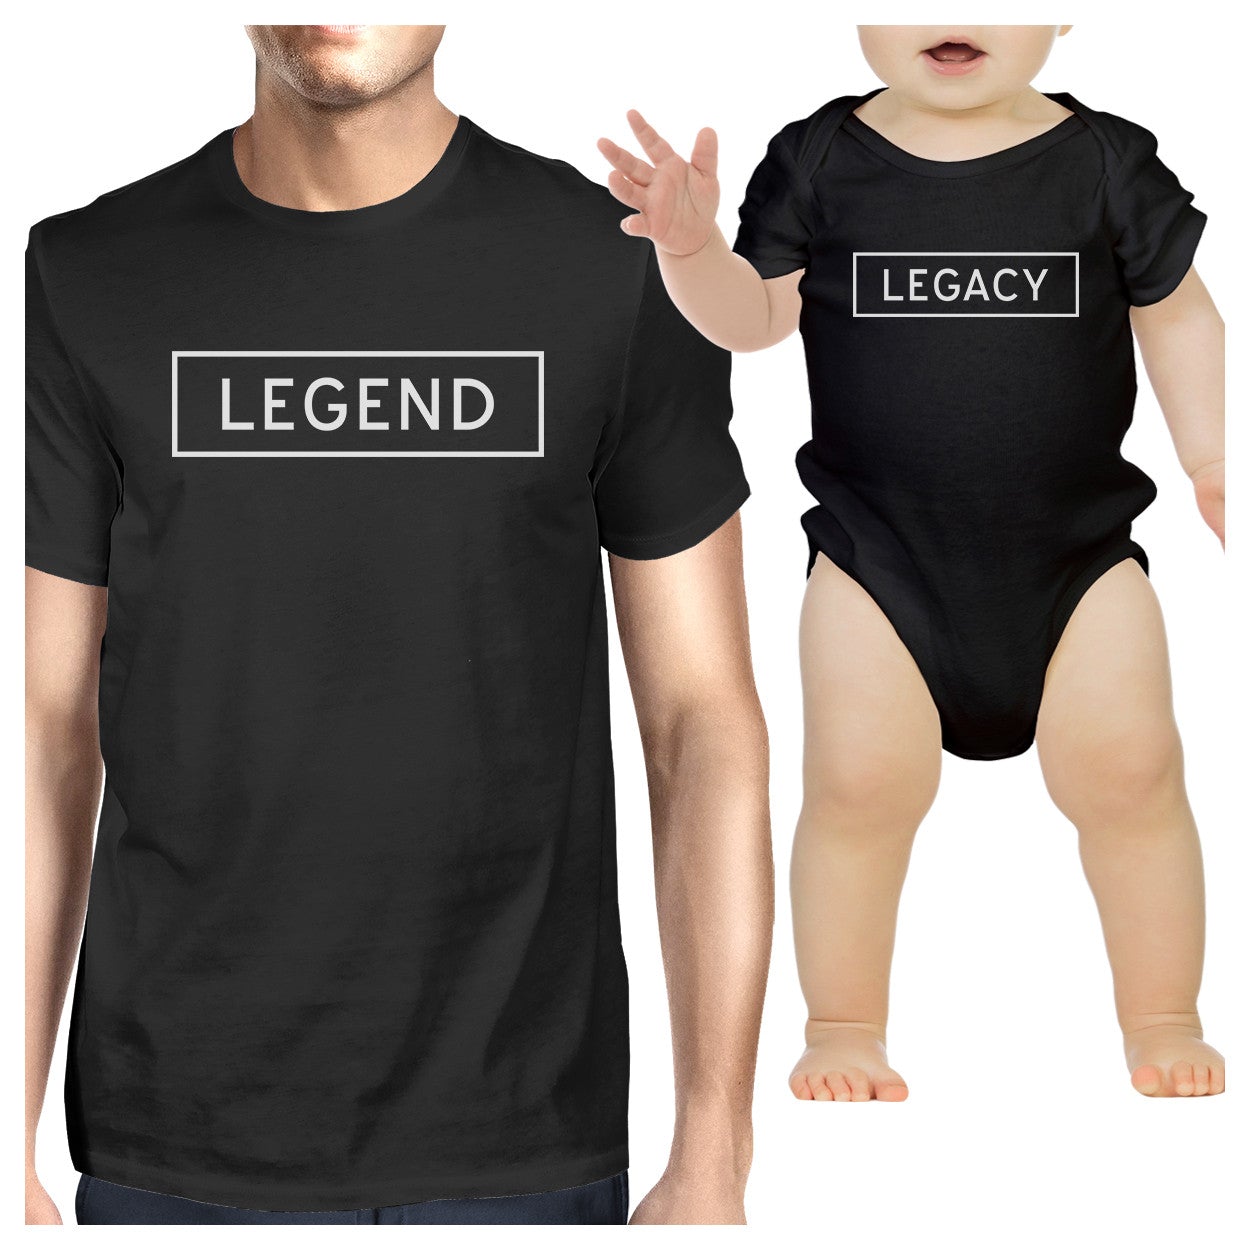 Legend Legacy Unique Design Funny Fathers Day Gift Idea For New Dad - 365 In Love